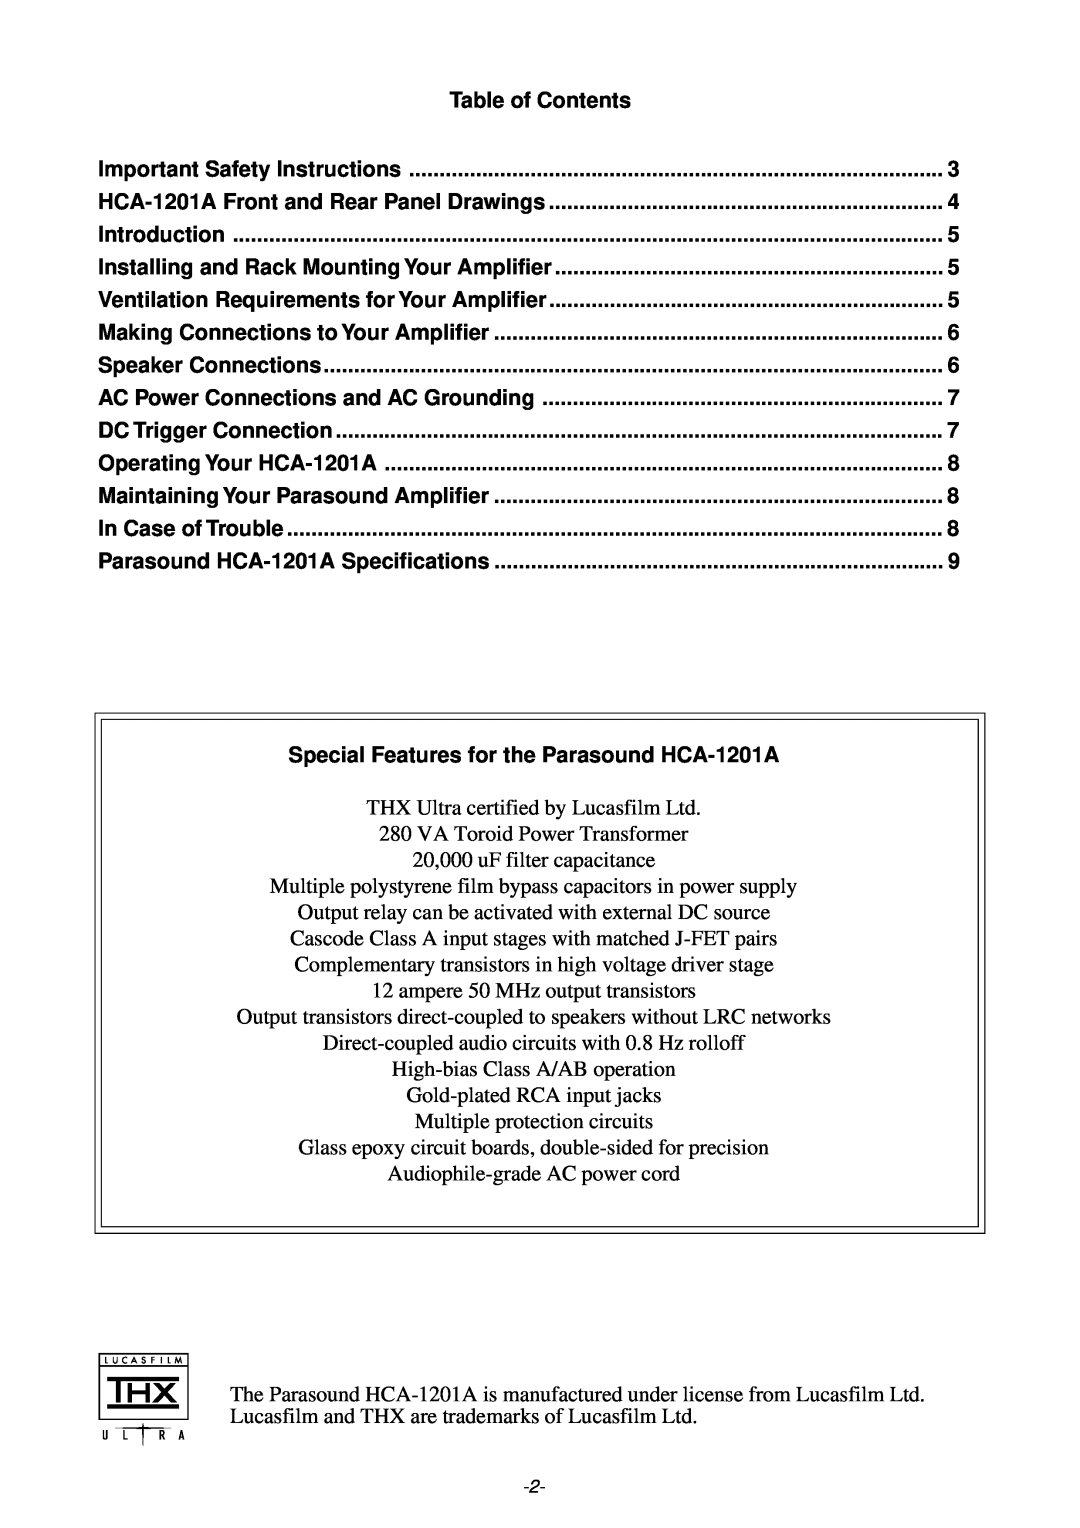 Parasound Table of Contents, Important Safety Instructions, HCA-1201AFront and Rear Panel Drawings, Introduction 